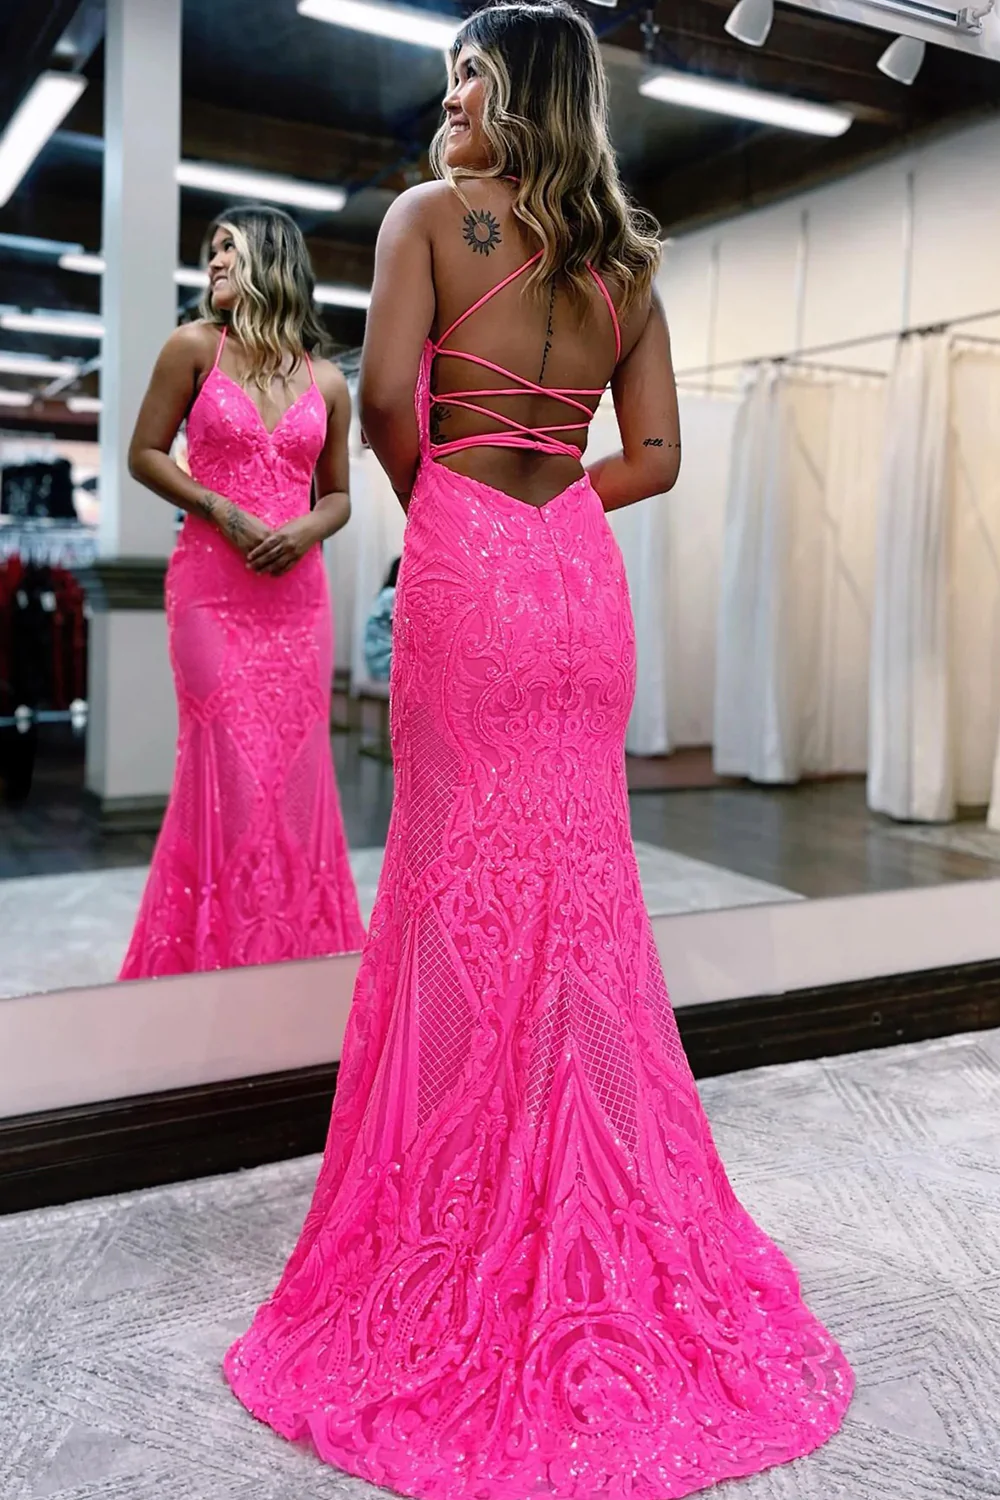 Sparkly Mermaid Backless Hot Pink Sequins Long Prom Dress nv747